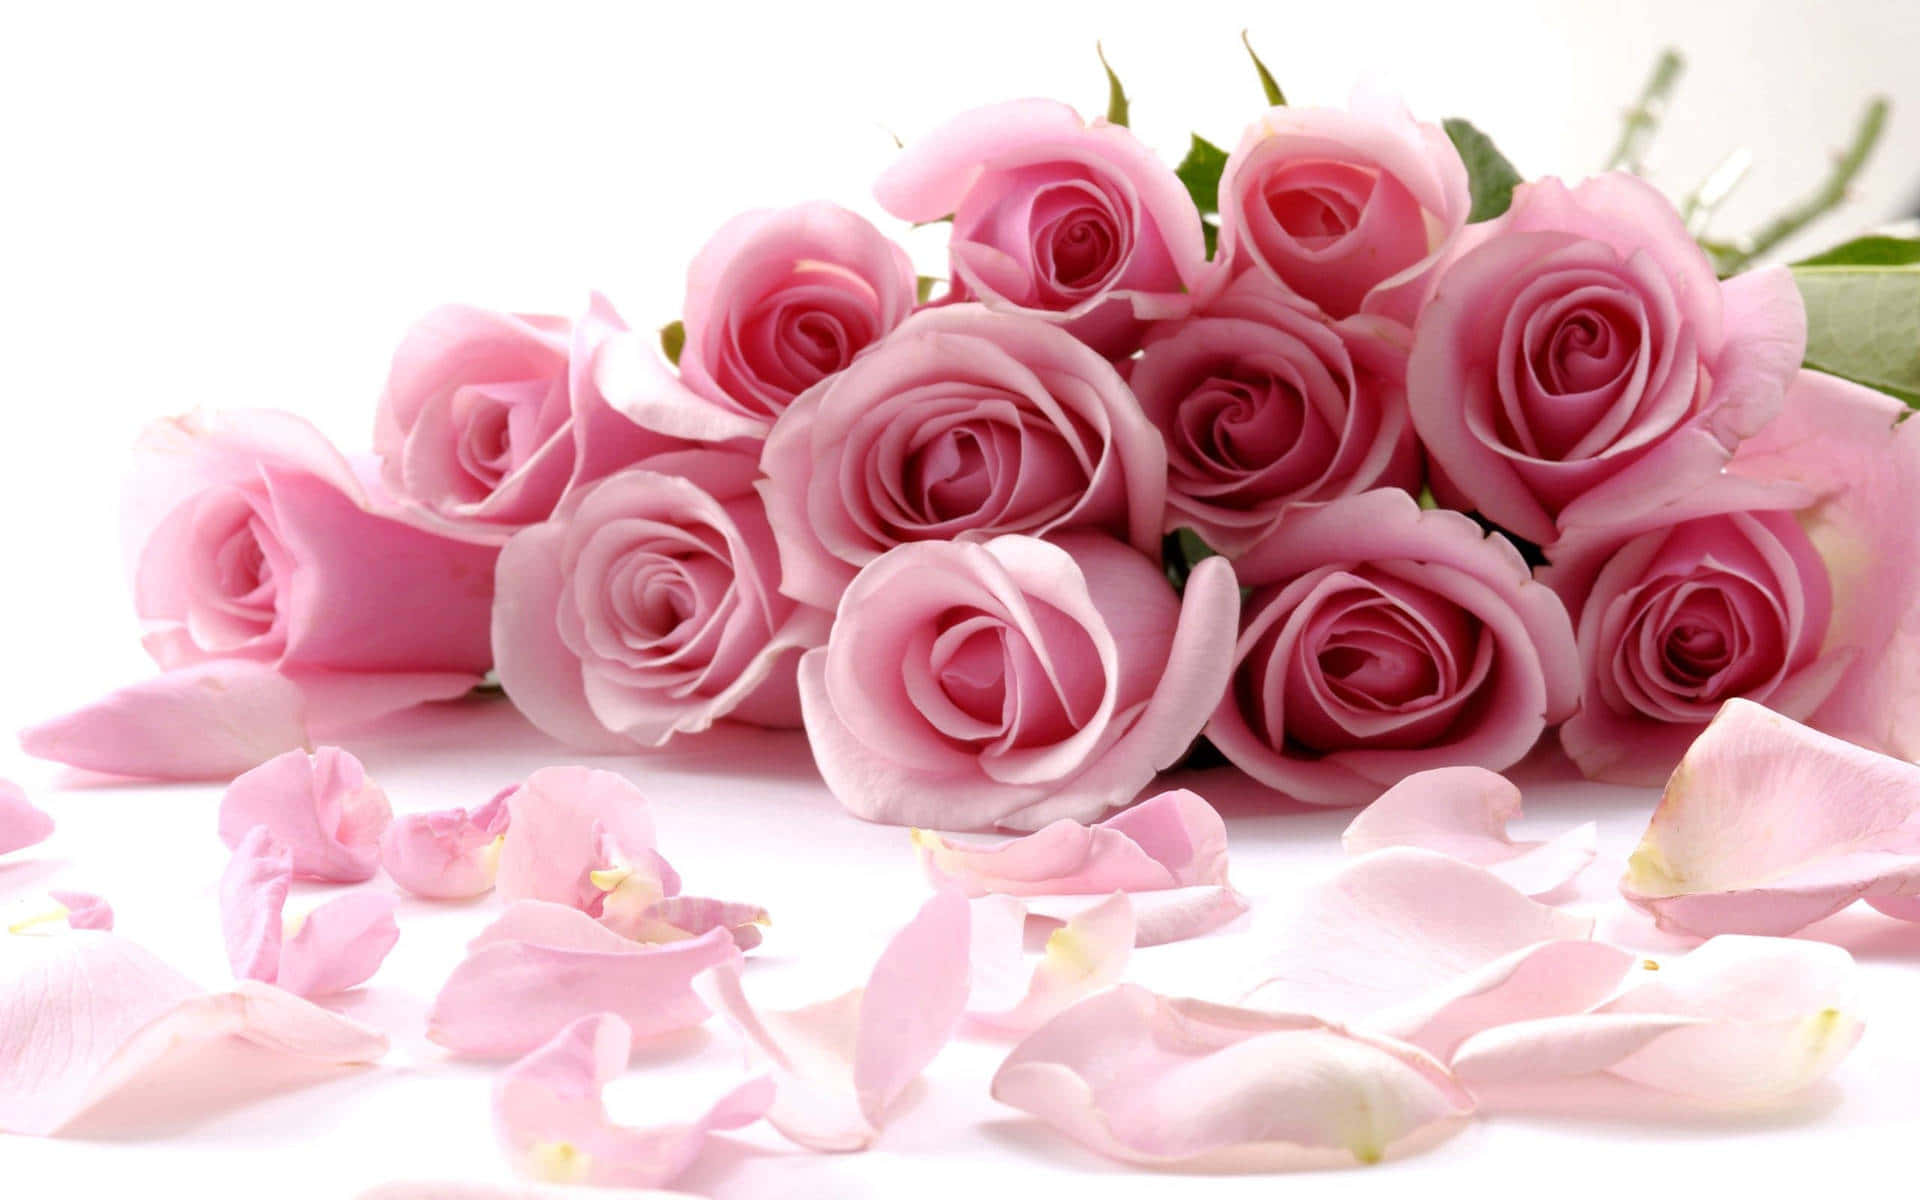 Pink Roses On A White Background Wallpaper